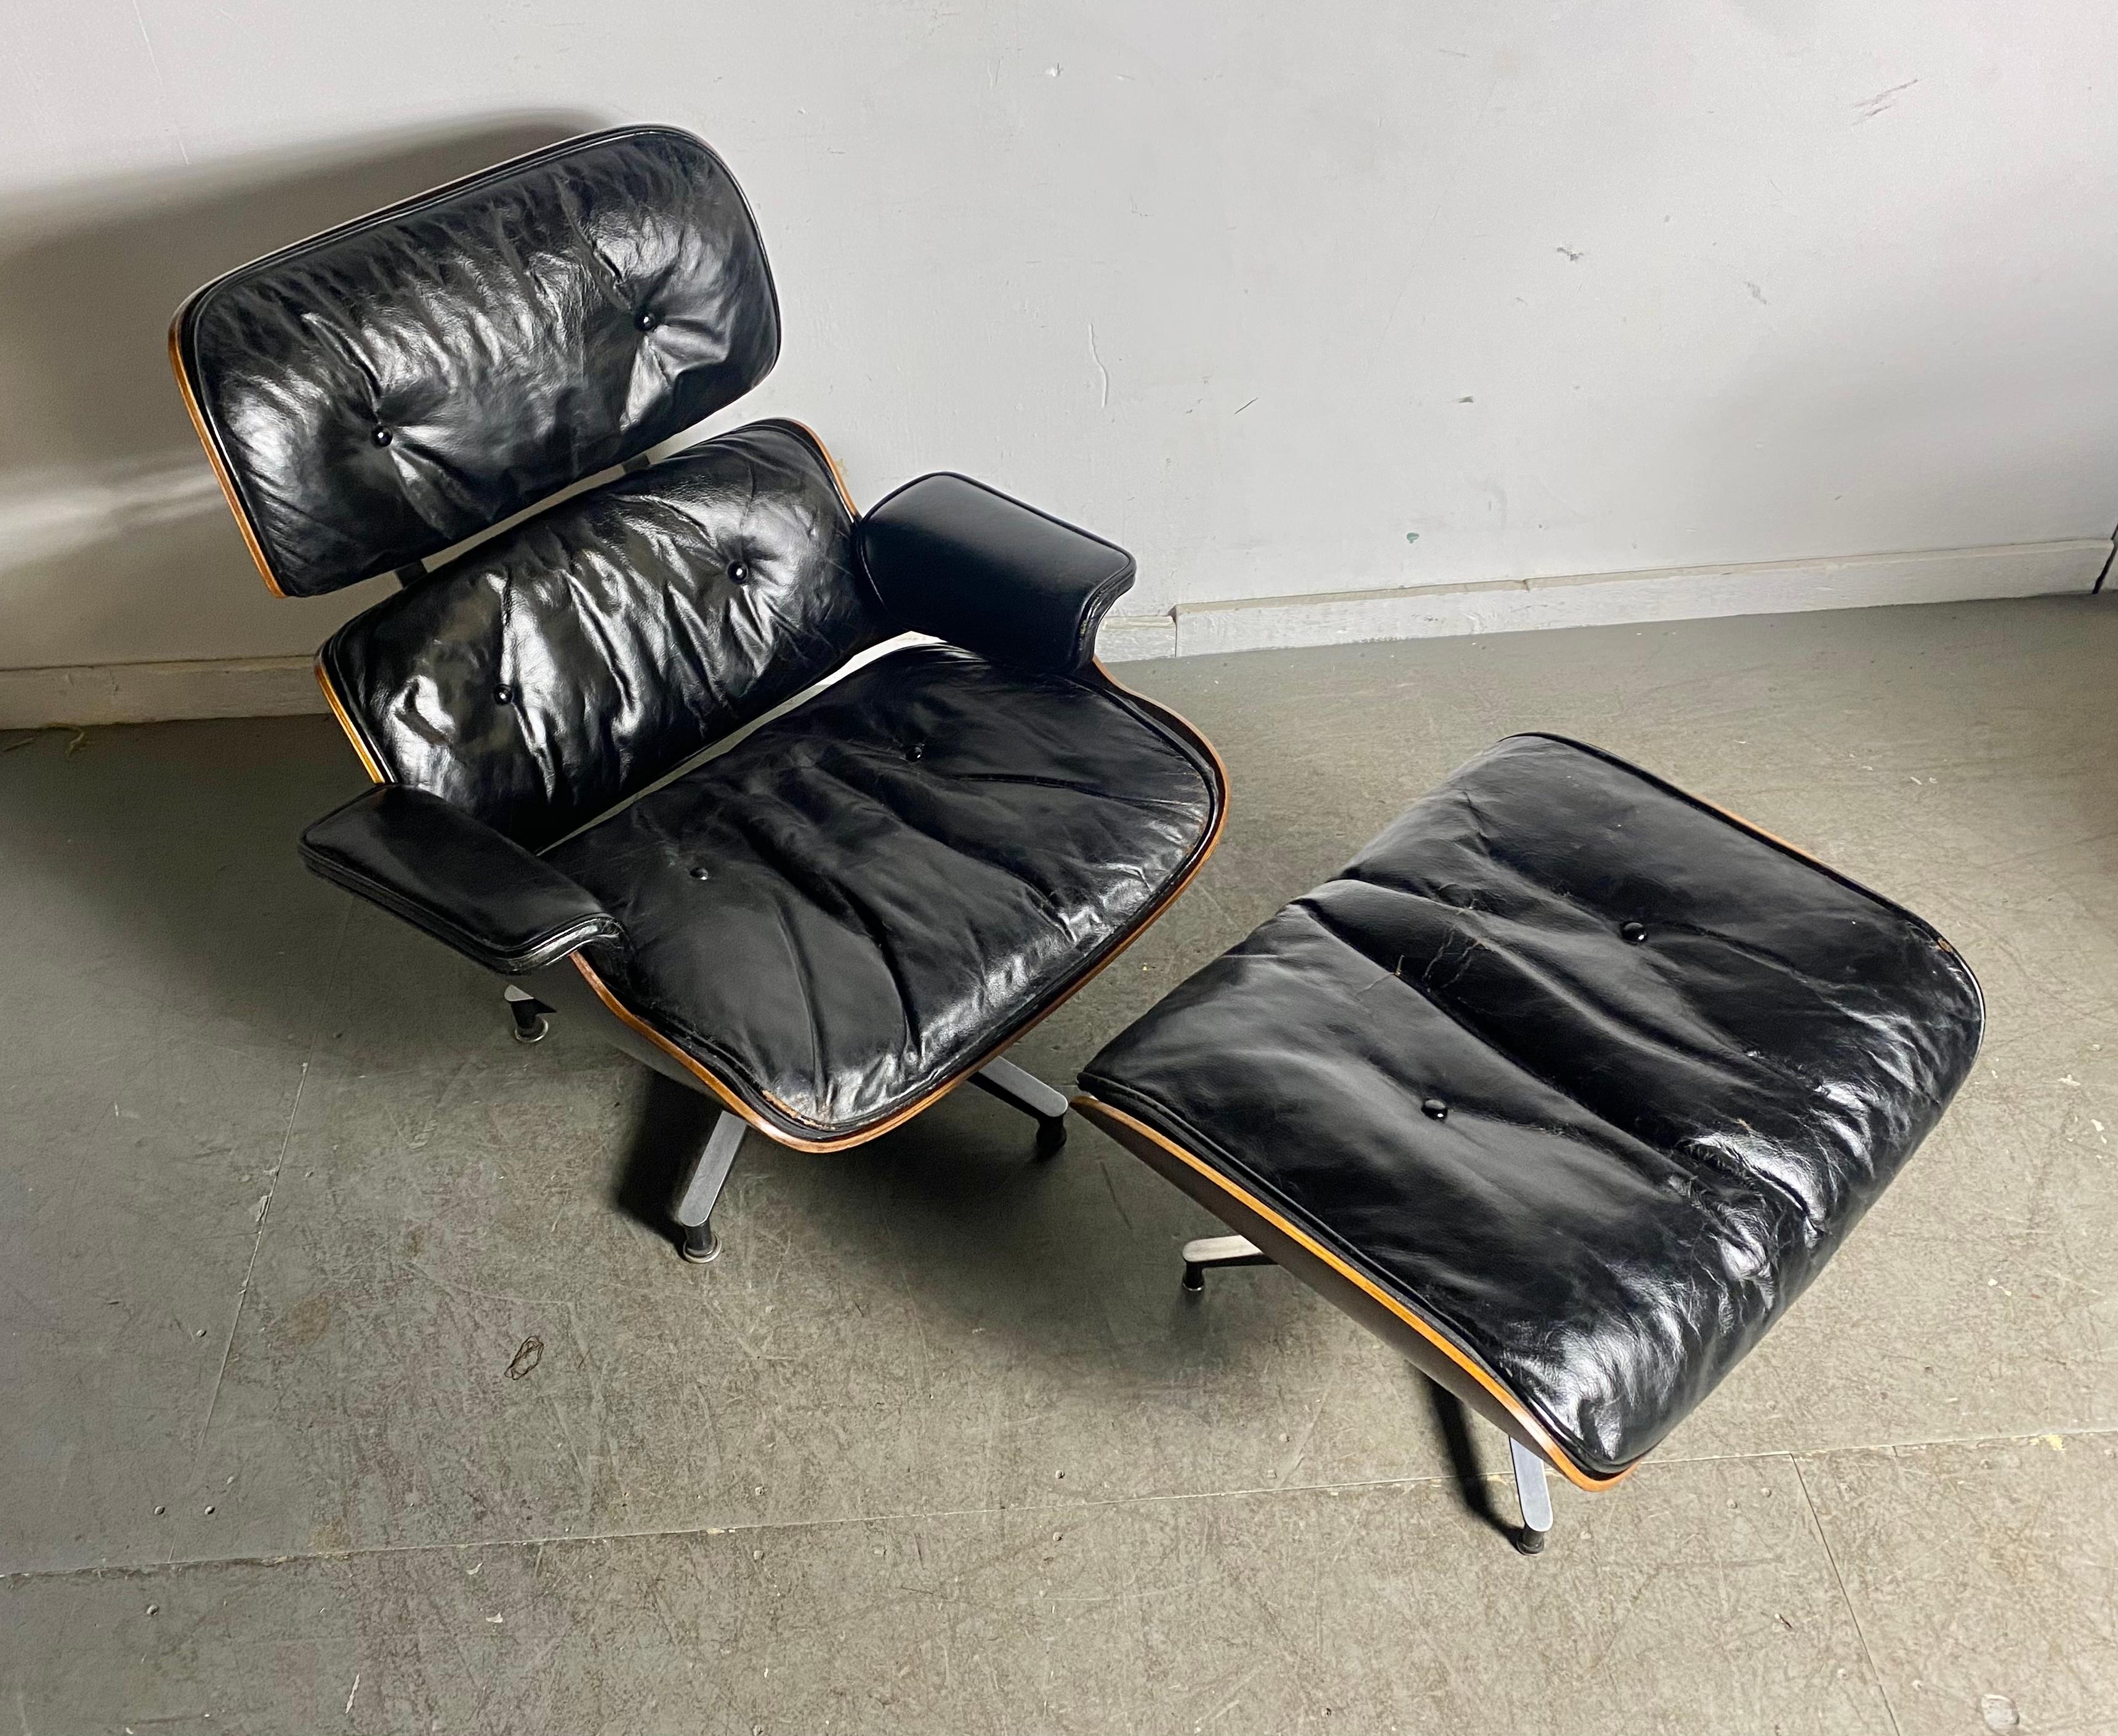 Rare 1st generation Charles Eames lounge chair and ottoman, Brazilian rosewood, leather. Manufactured by Herman Miller. Highly -coveted, part livable investment, part functional furniture. Originally purchased in 1957-58, features Brazilian Rosewood